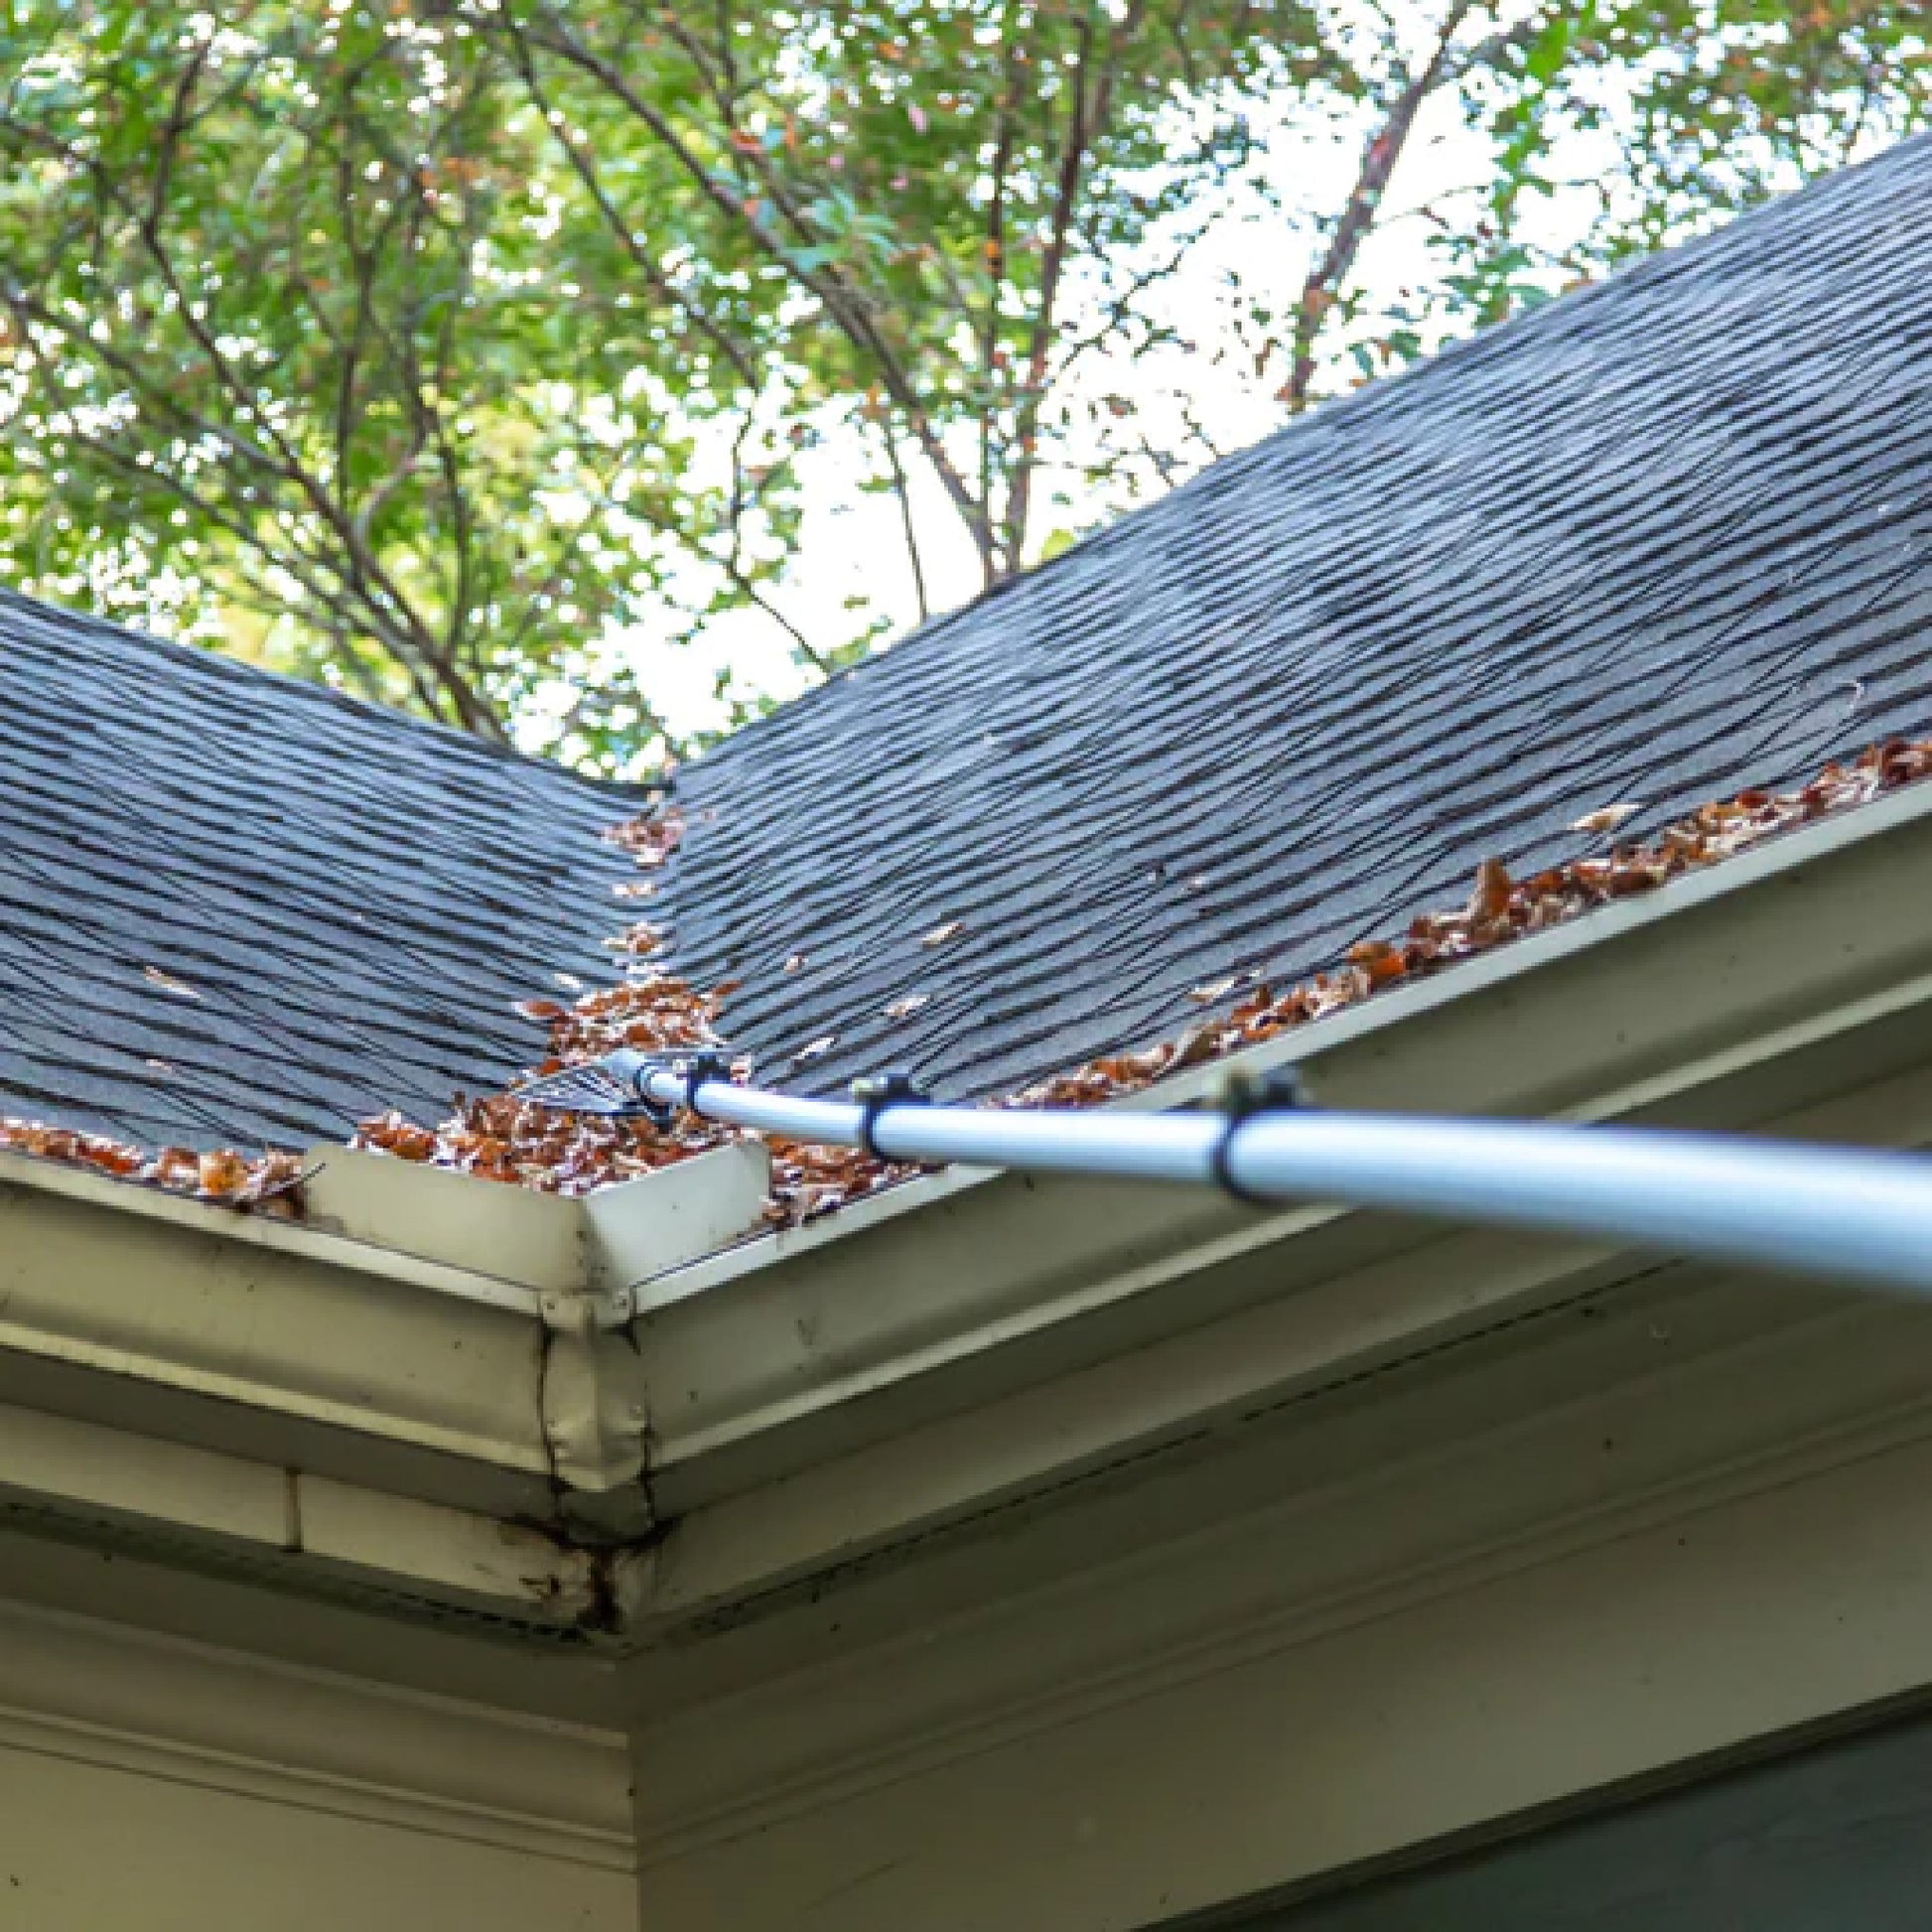 Adjustable Roof Rake easily remove leaves from roof